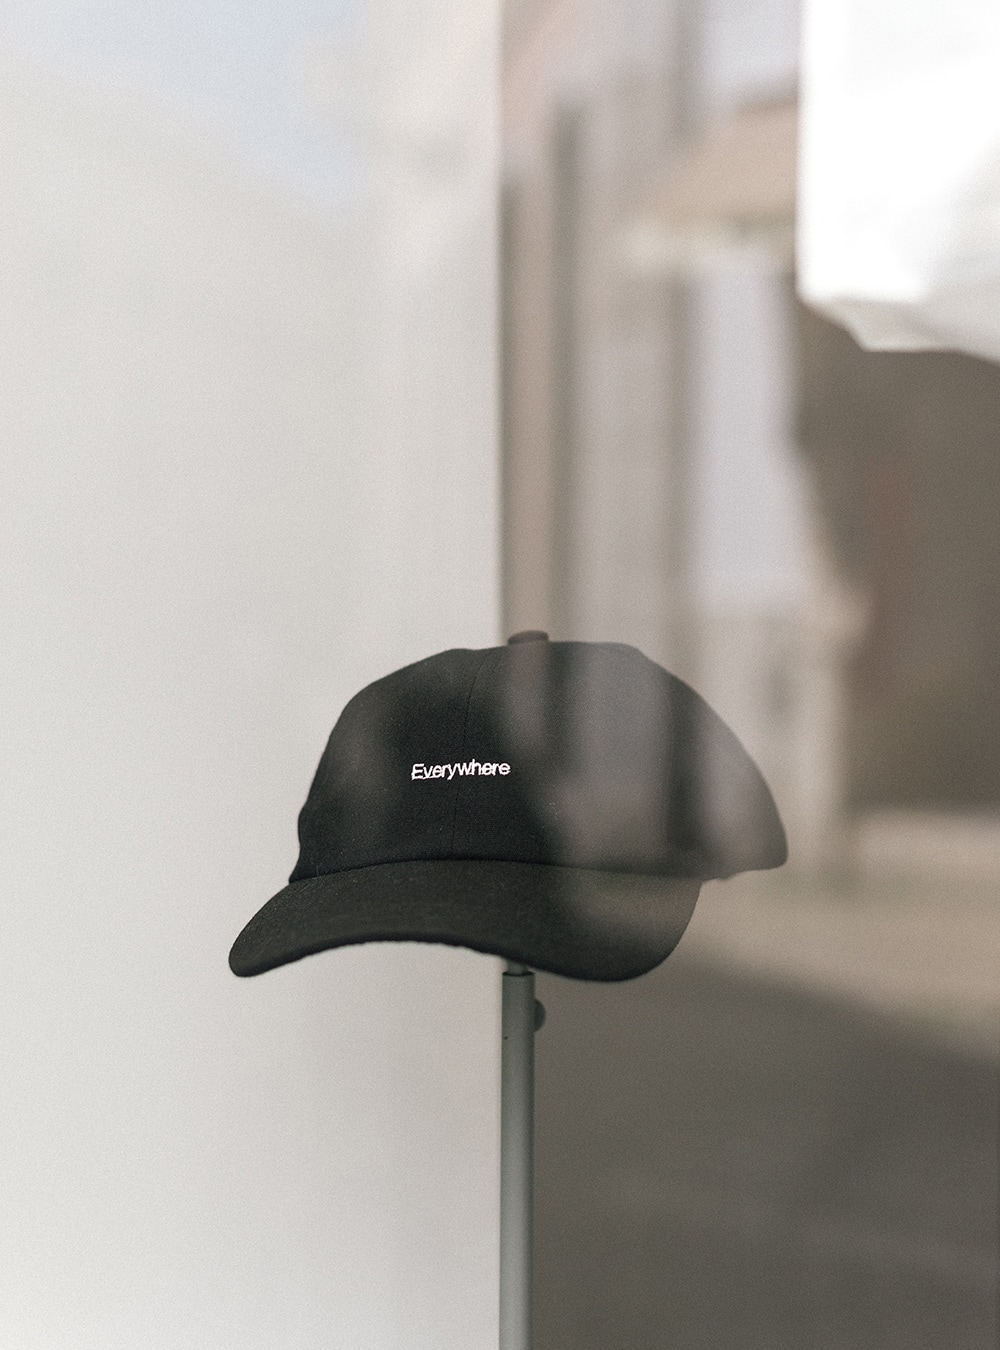 The everywhere cap, in black, in display at the window of wetheknot shop in Lisbon